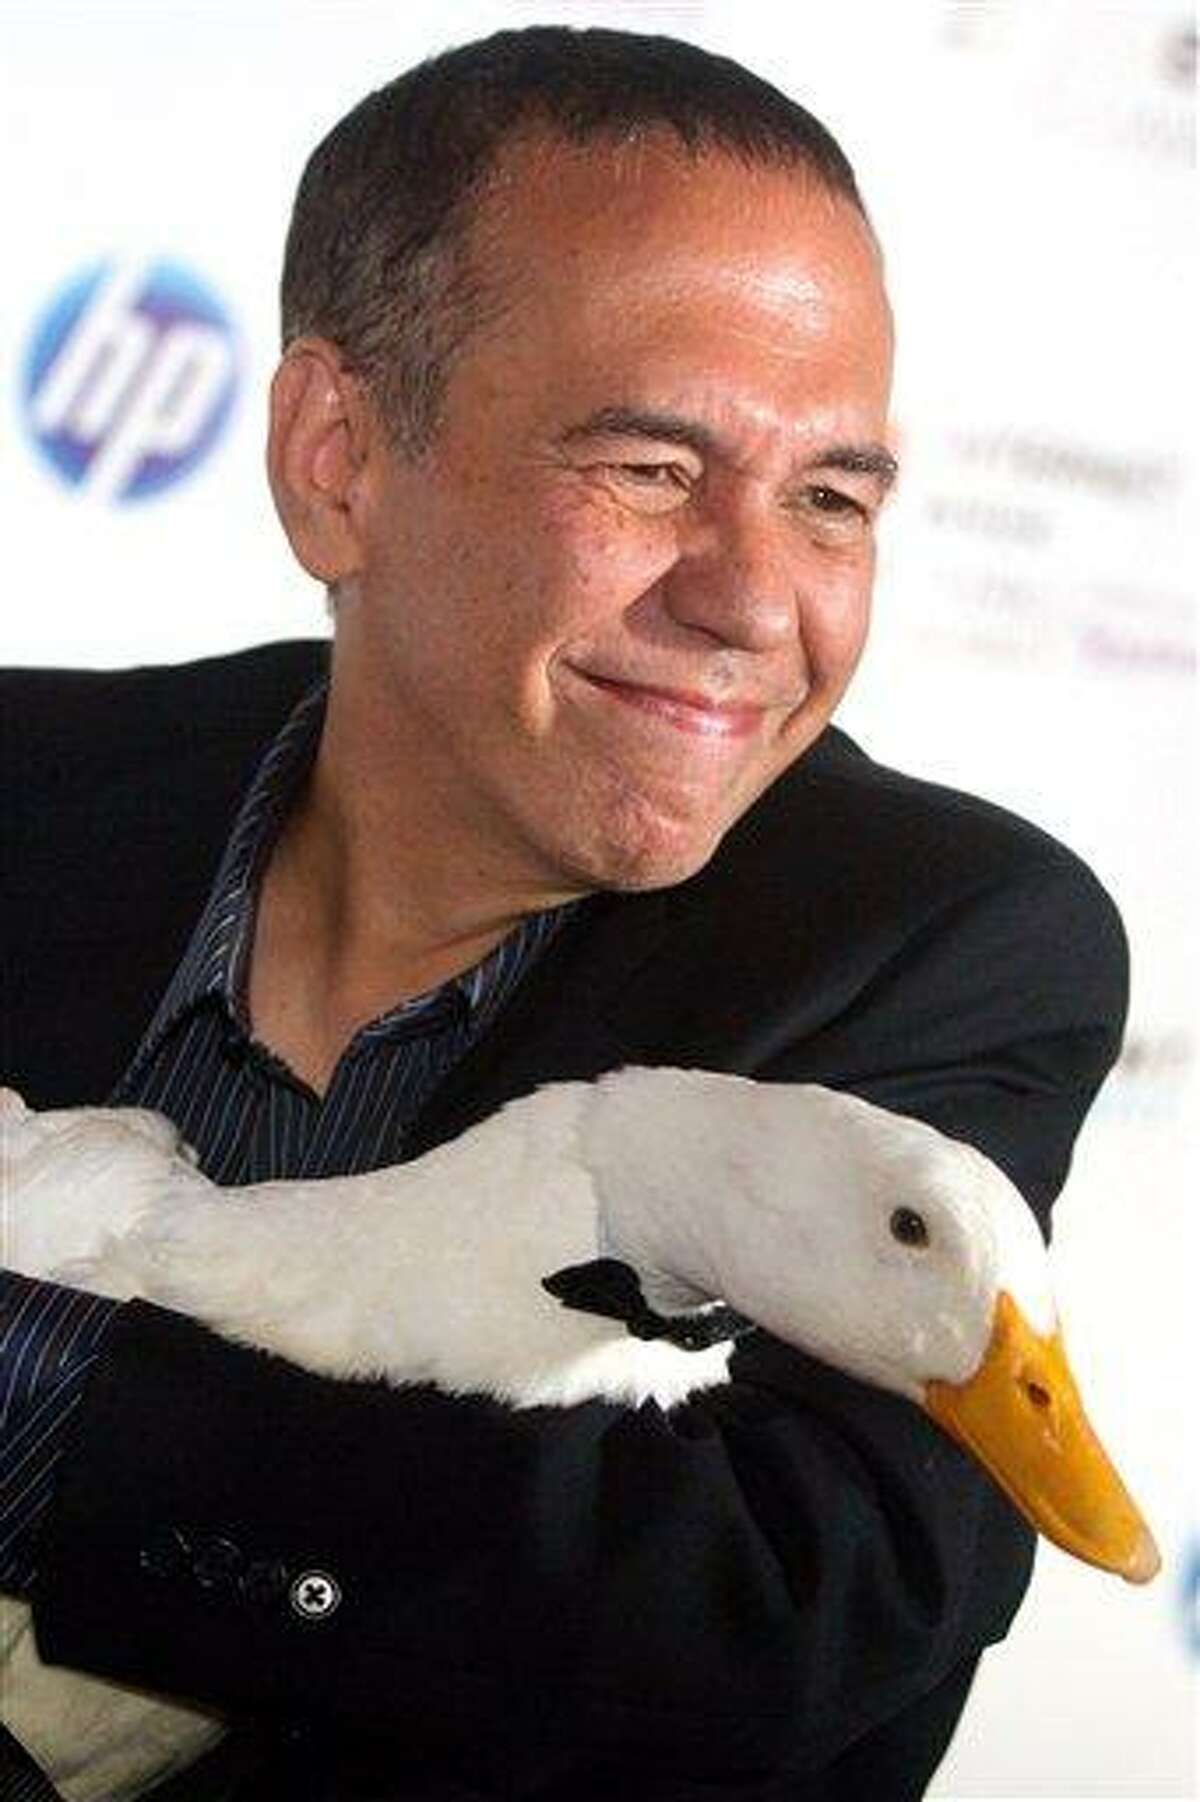 FILE - In this June 14, 2010 file photo, Gilbert Gottfried arrives with the Aflac duck to the 14th Annual Webby Awards in New York. Aflac on Monday, March 14, 2011 announced that it has severed ties with Gottfried over jokes about the earthquake and tsunami in Japan that the comedian posted on Twitter. (AP Photo/Charles Sykes, File)